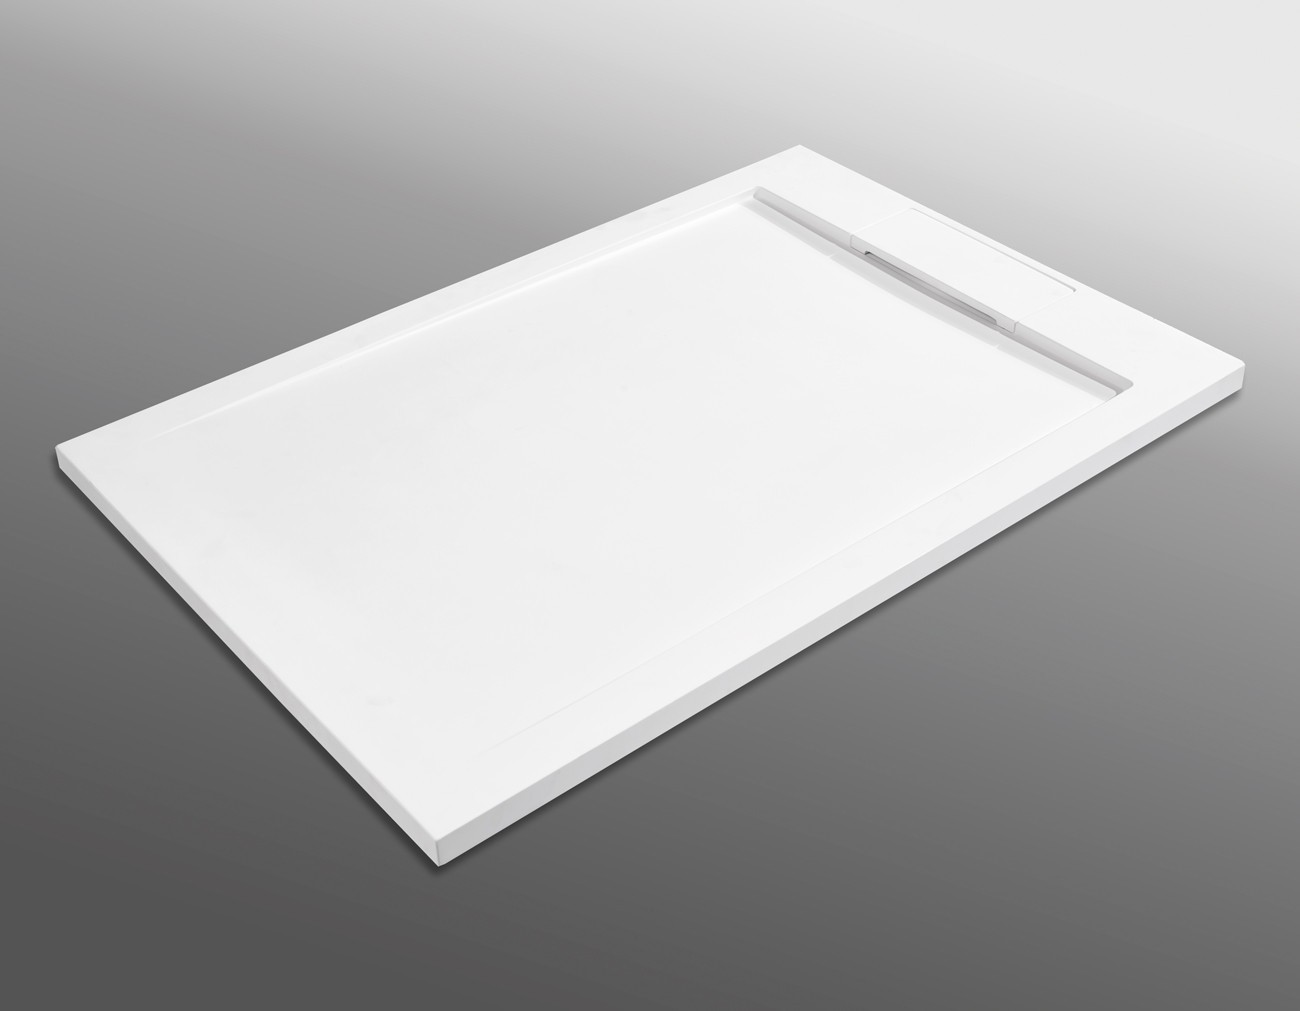 White Shower Tray in 3.5 cm thick resin marble
